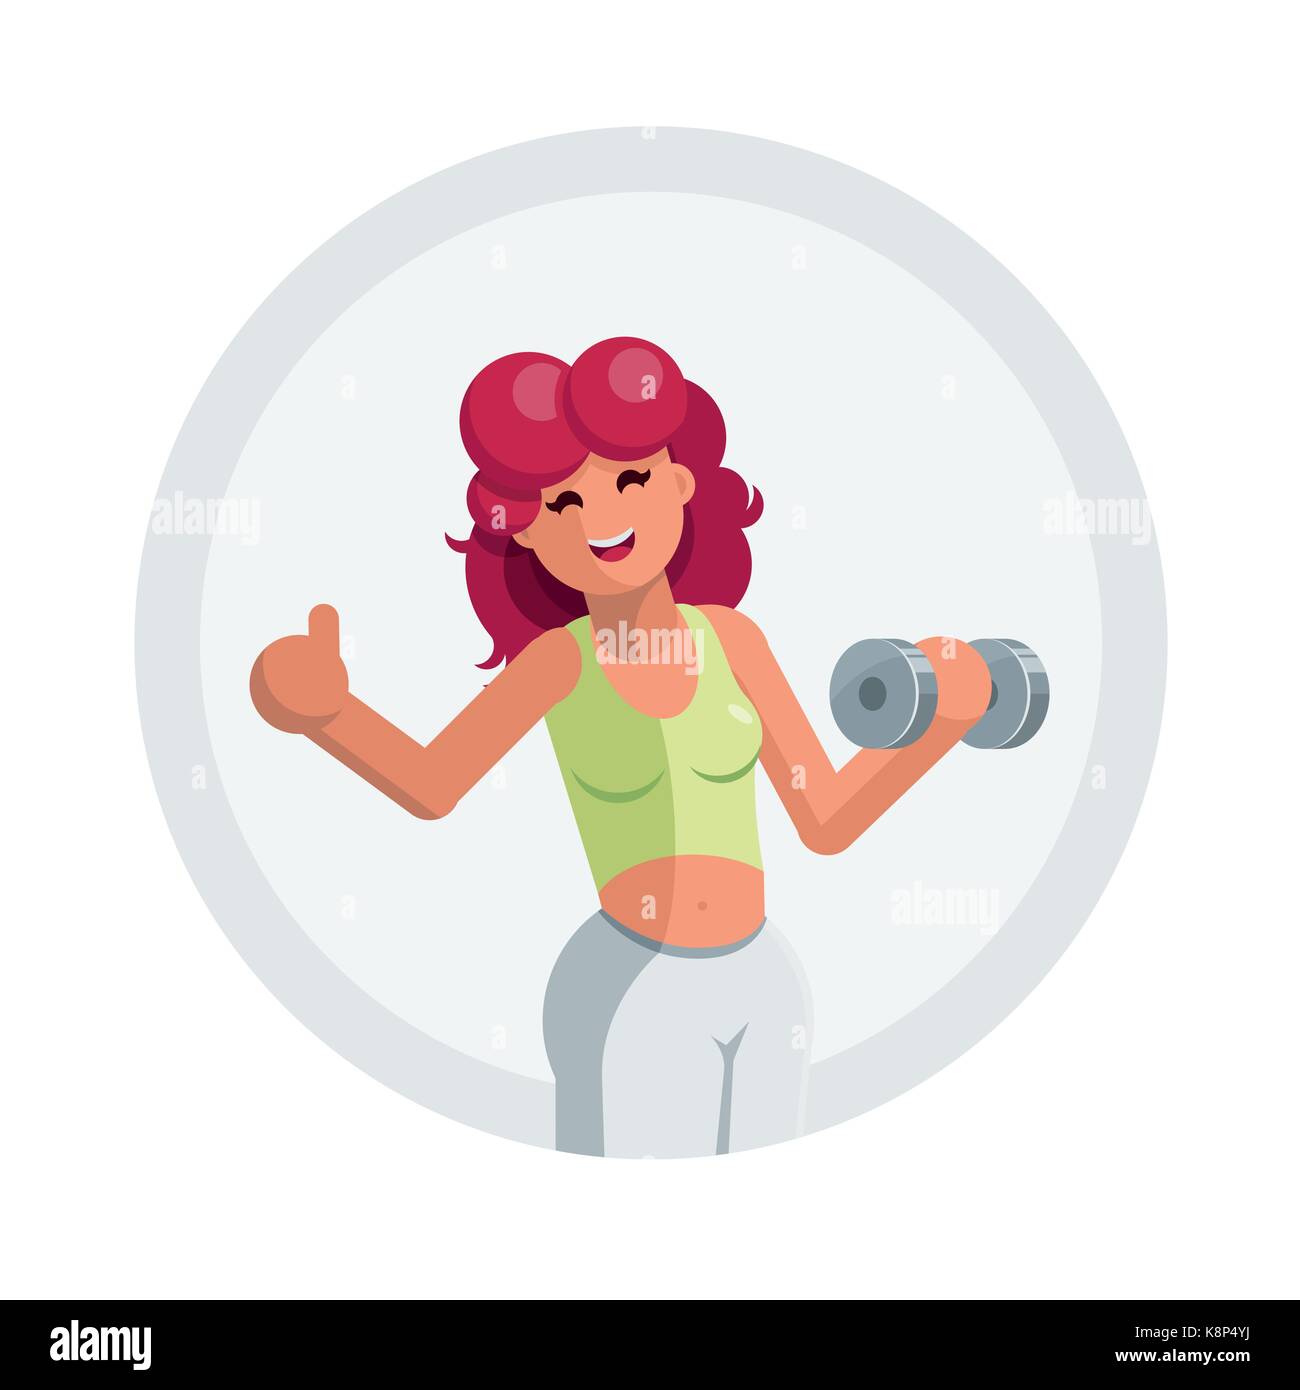 Fitness concept illustration. Beautiful red hair young woman training with dumbbell. Vector flat illustration. Stock Vector